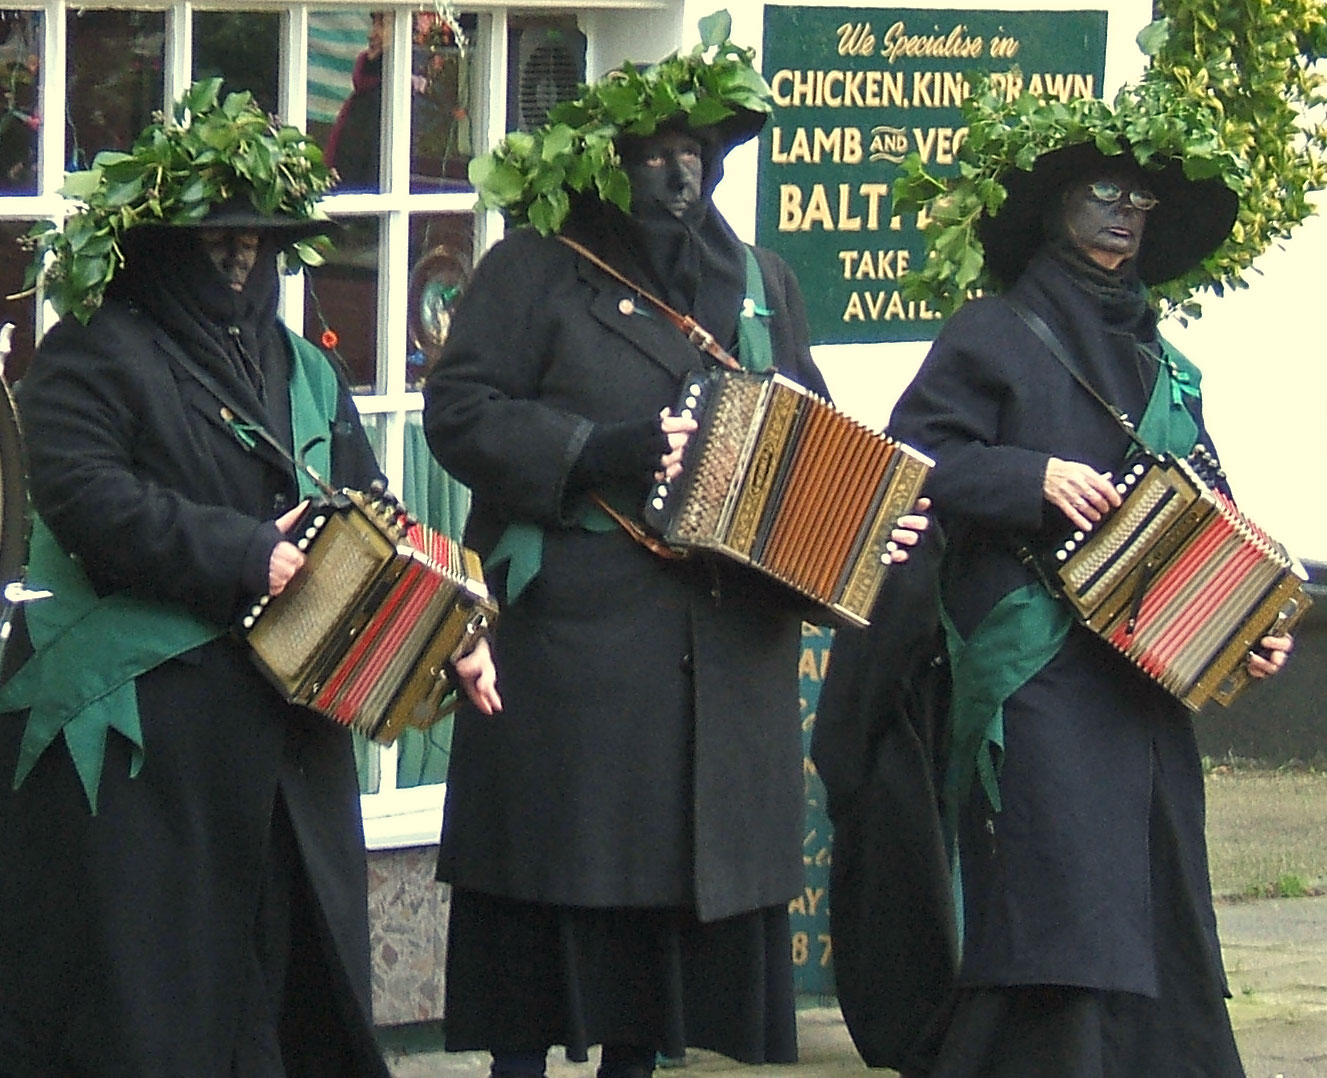 three men wearing black outfits with colorful accordions